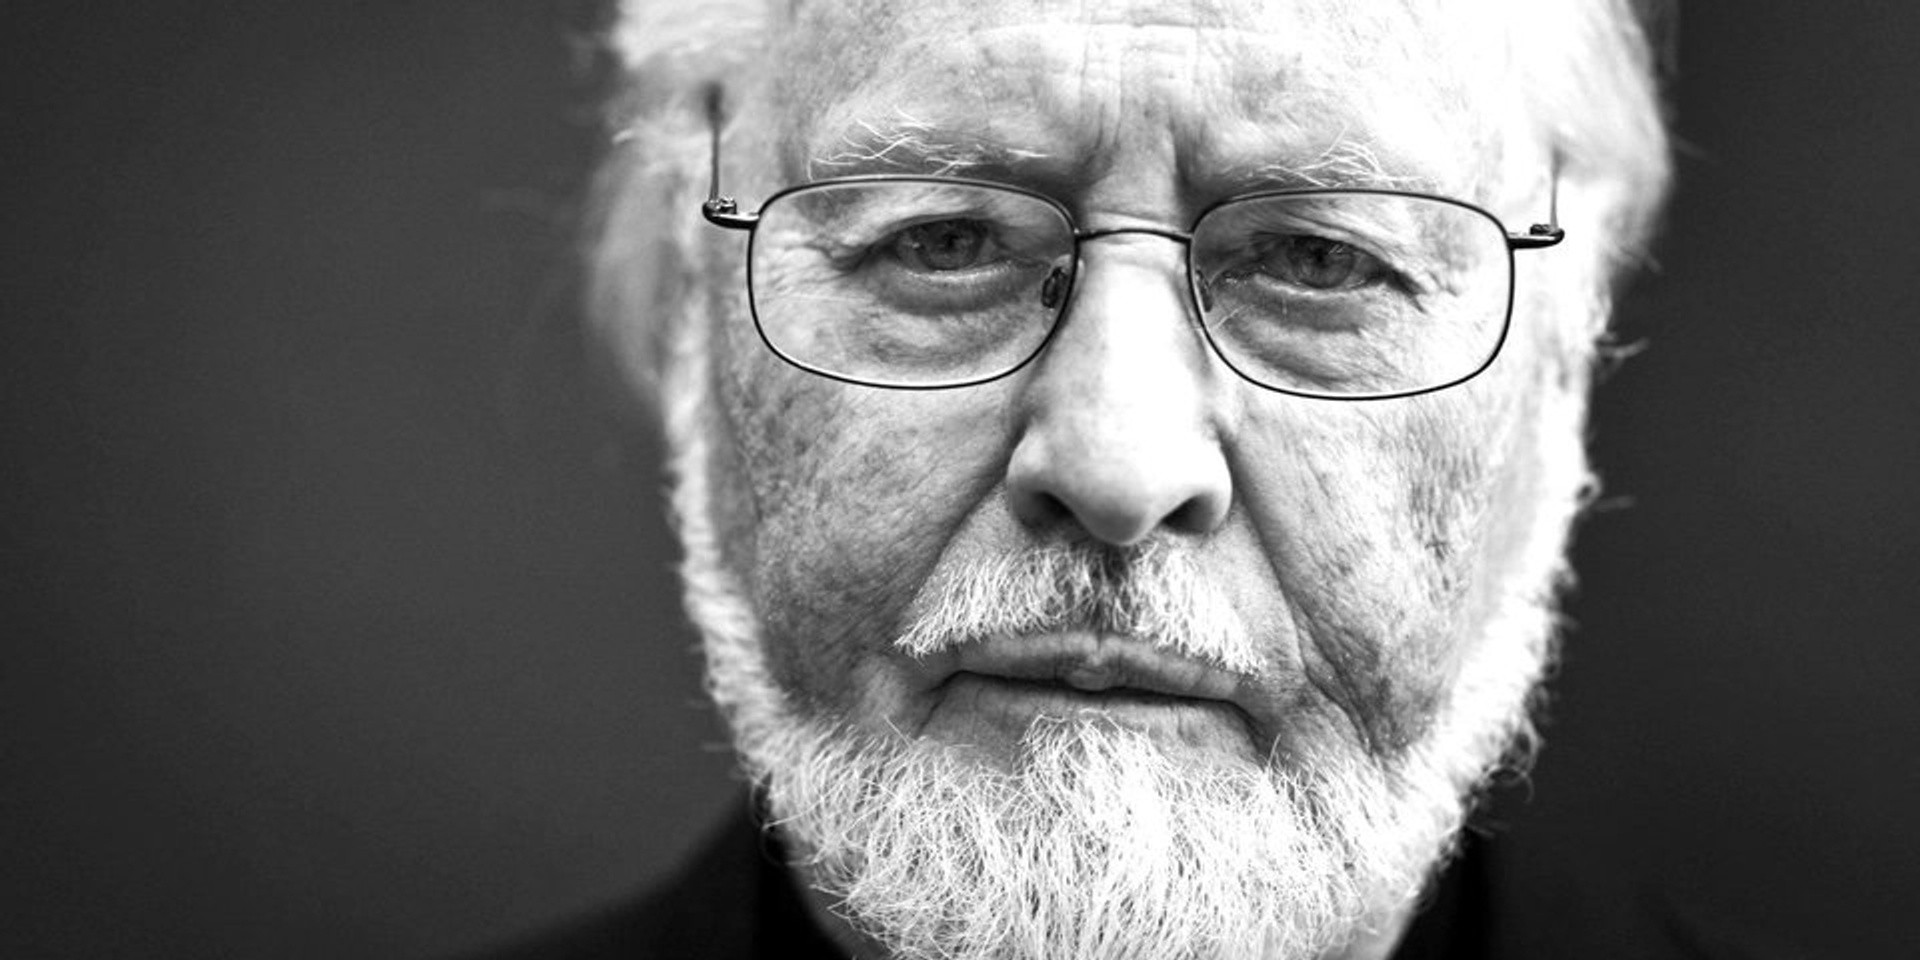 Star Wars to Superman: the essential soundtracks of John Williams